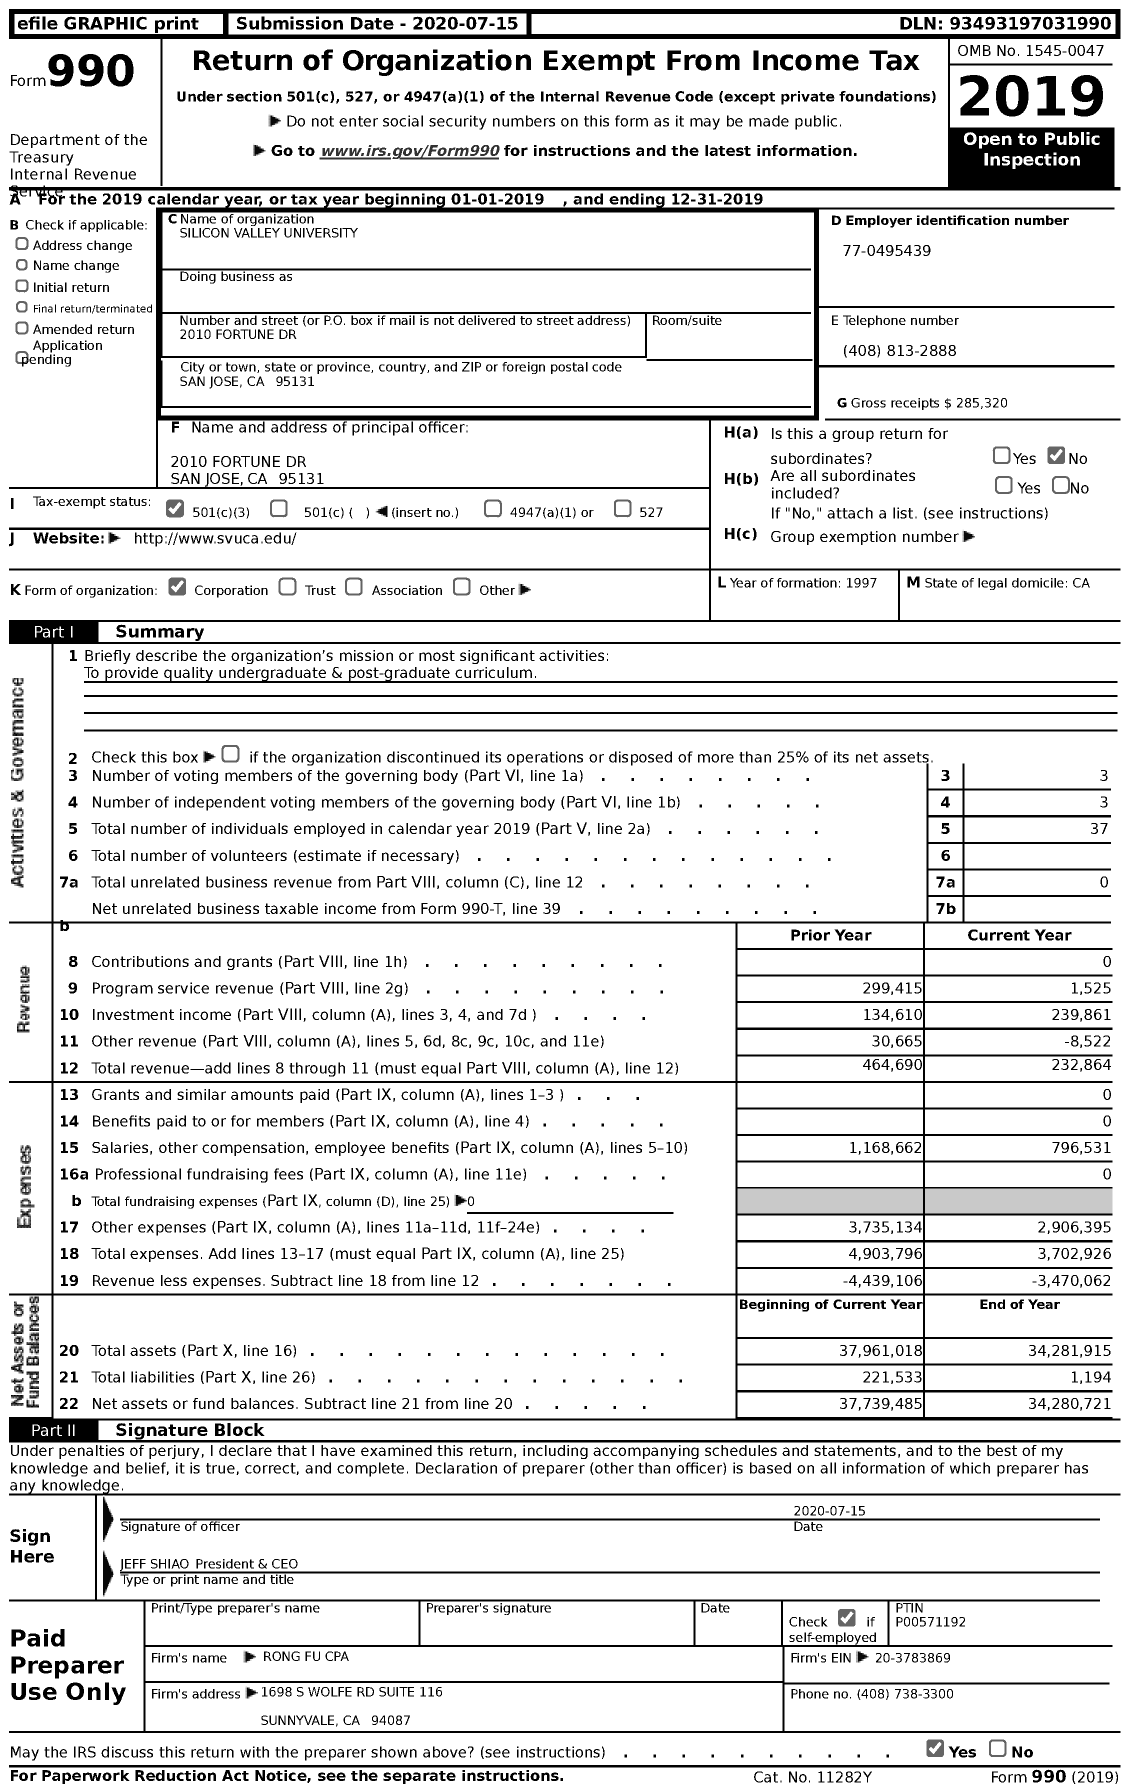 Image of first page of 2019 Form 990 for Silicon Valley University (SVU)